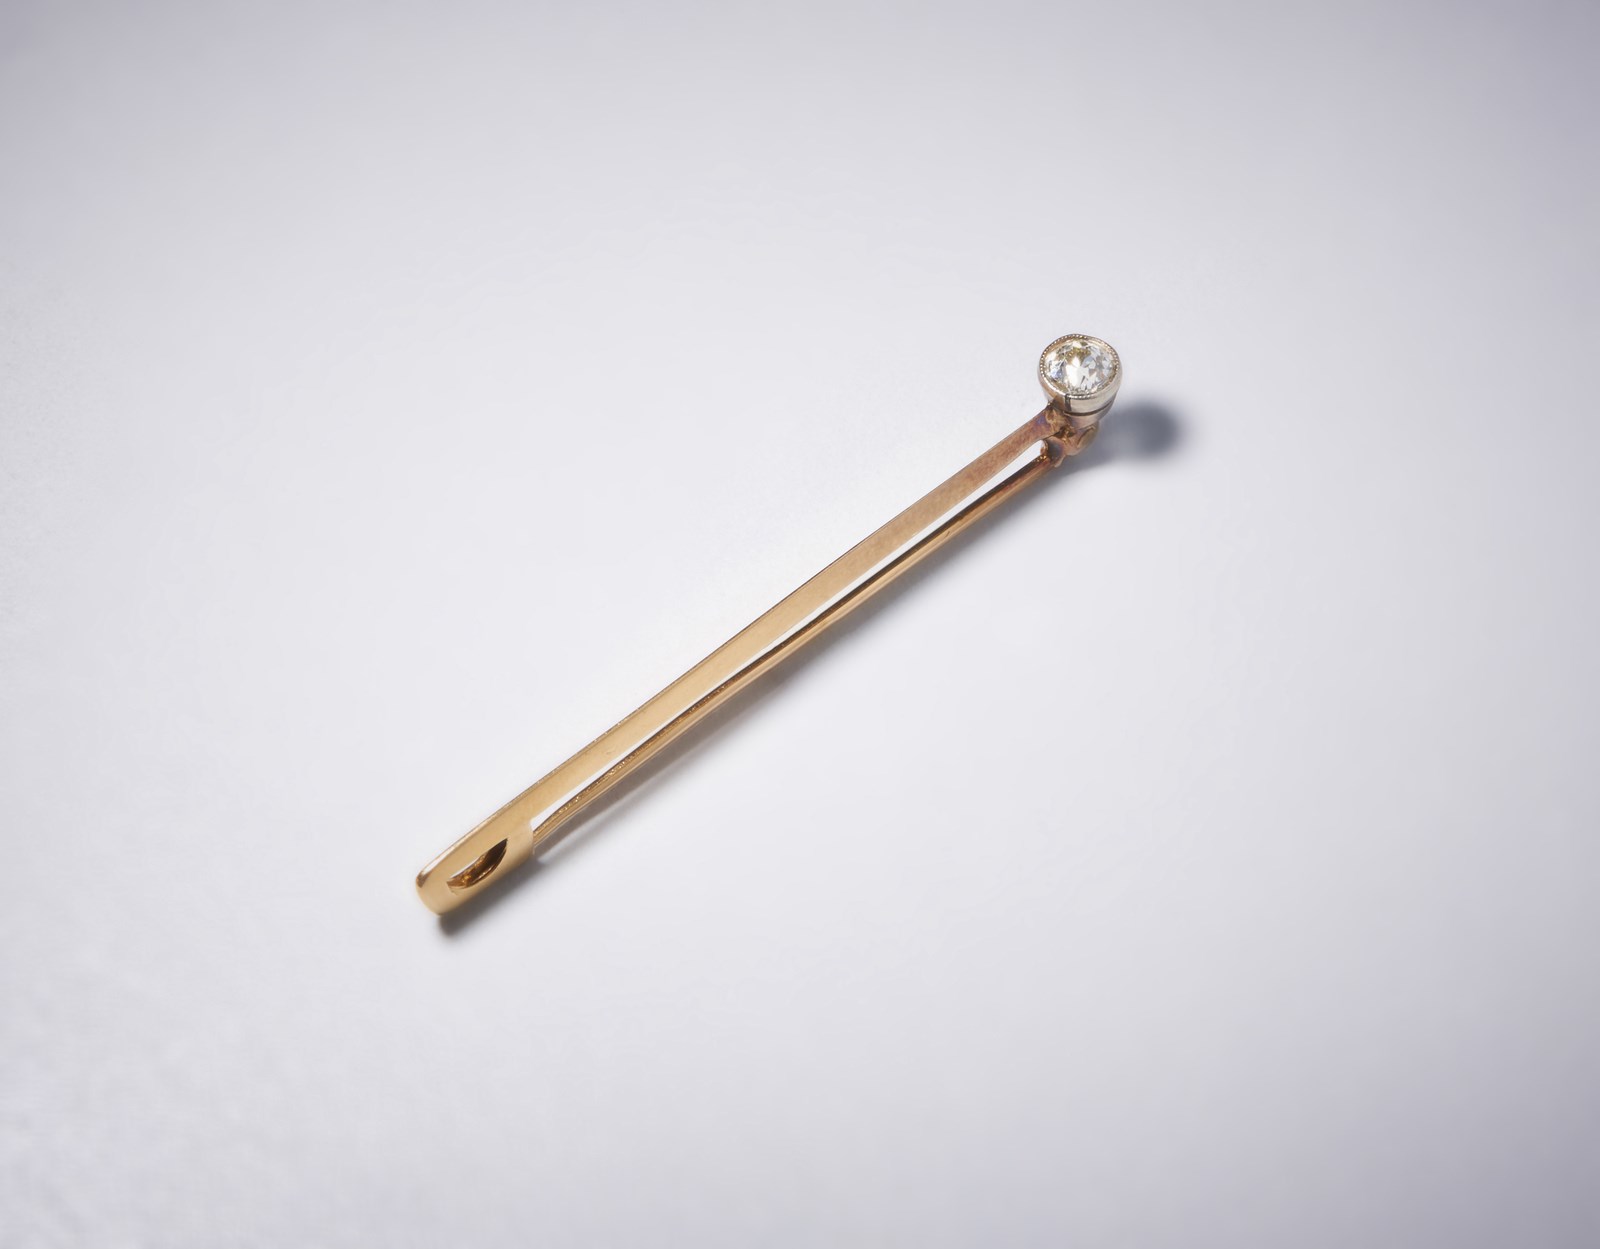 Tie clip in yellow gold 750/1000 with white diamond of old cut of about 0.60 cts. with pearl setting. (. )